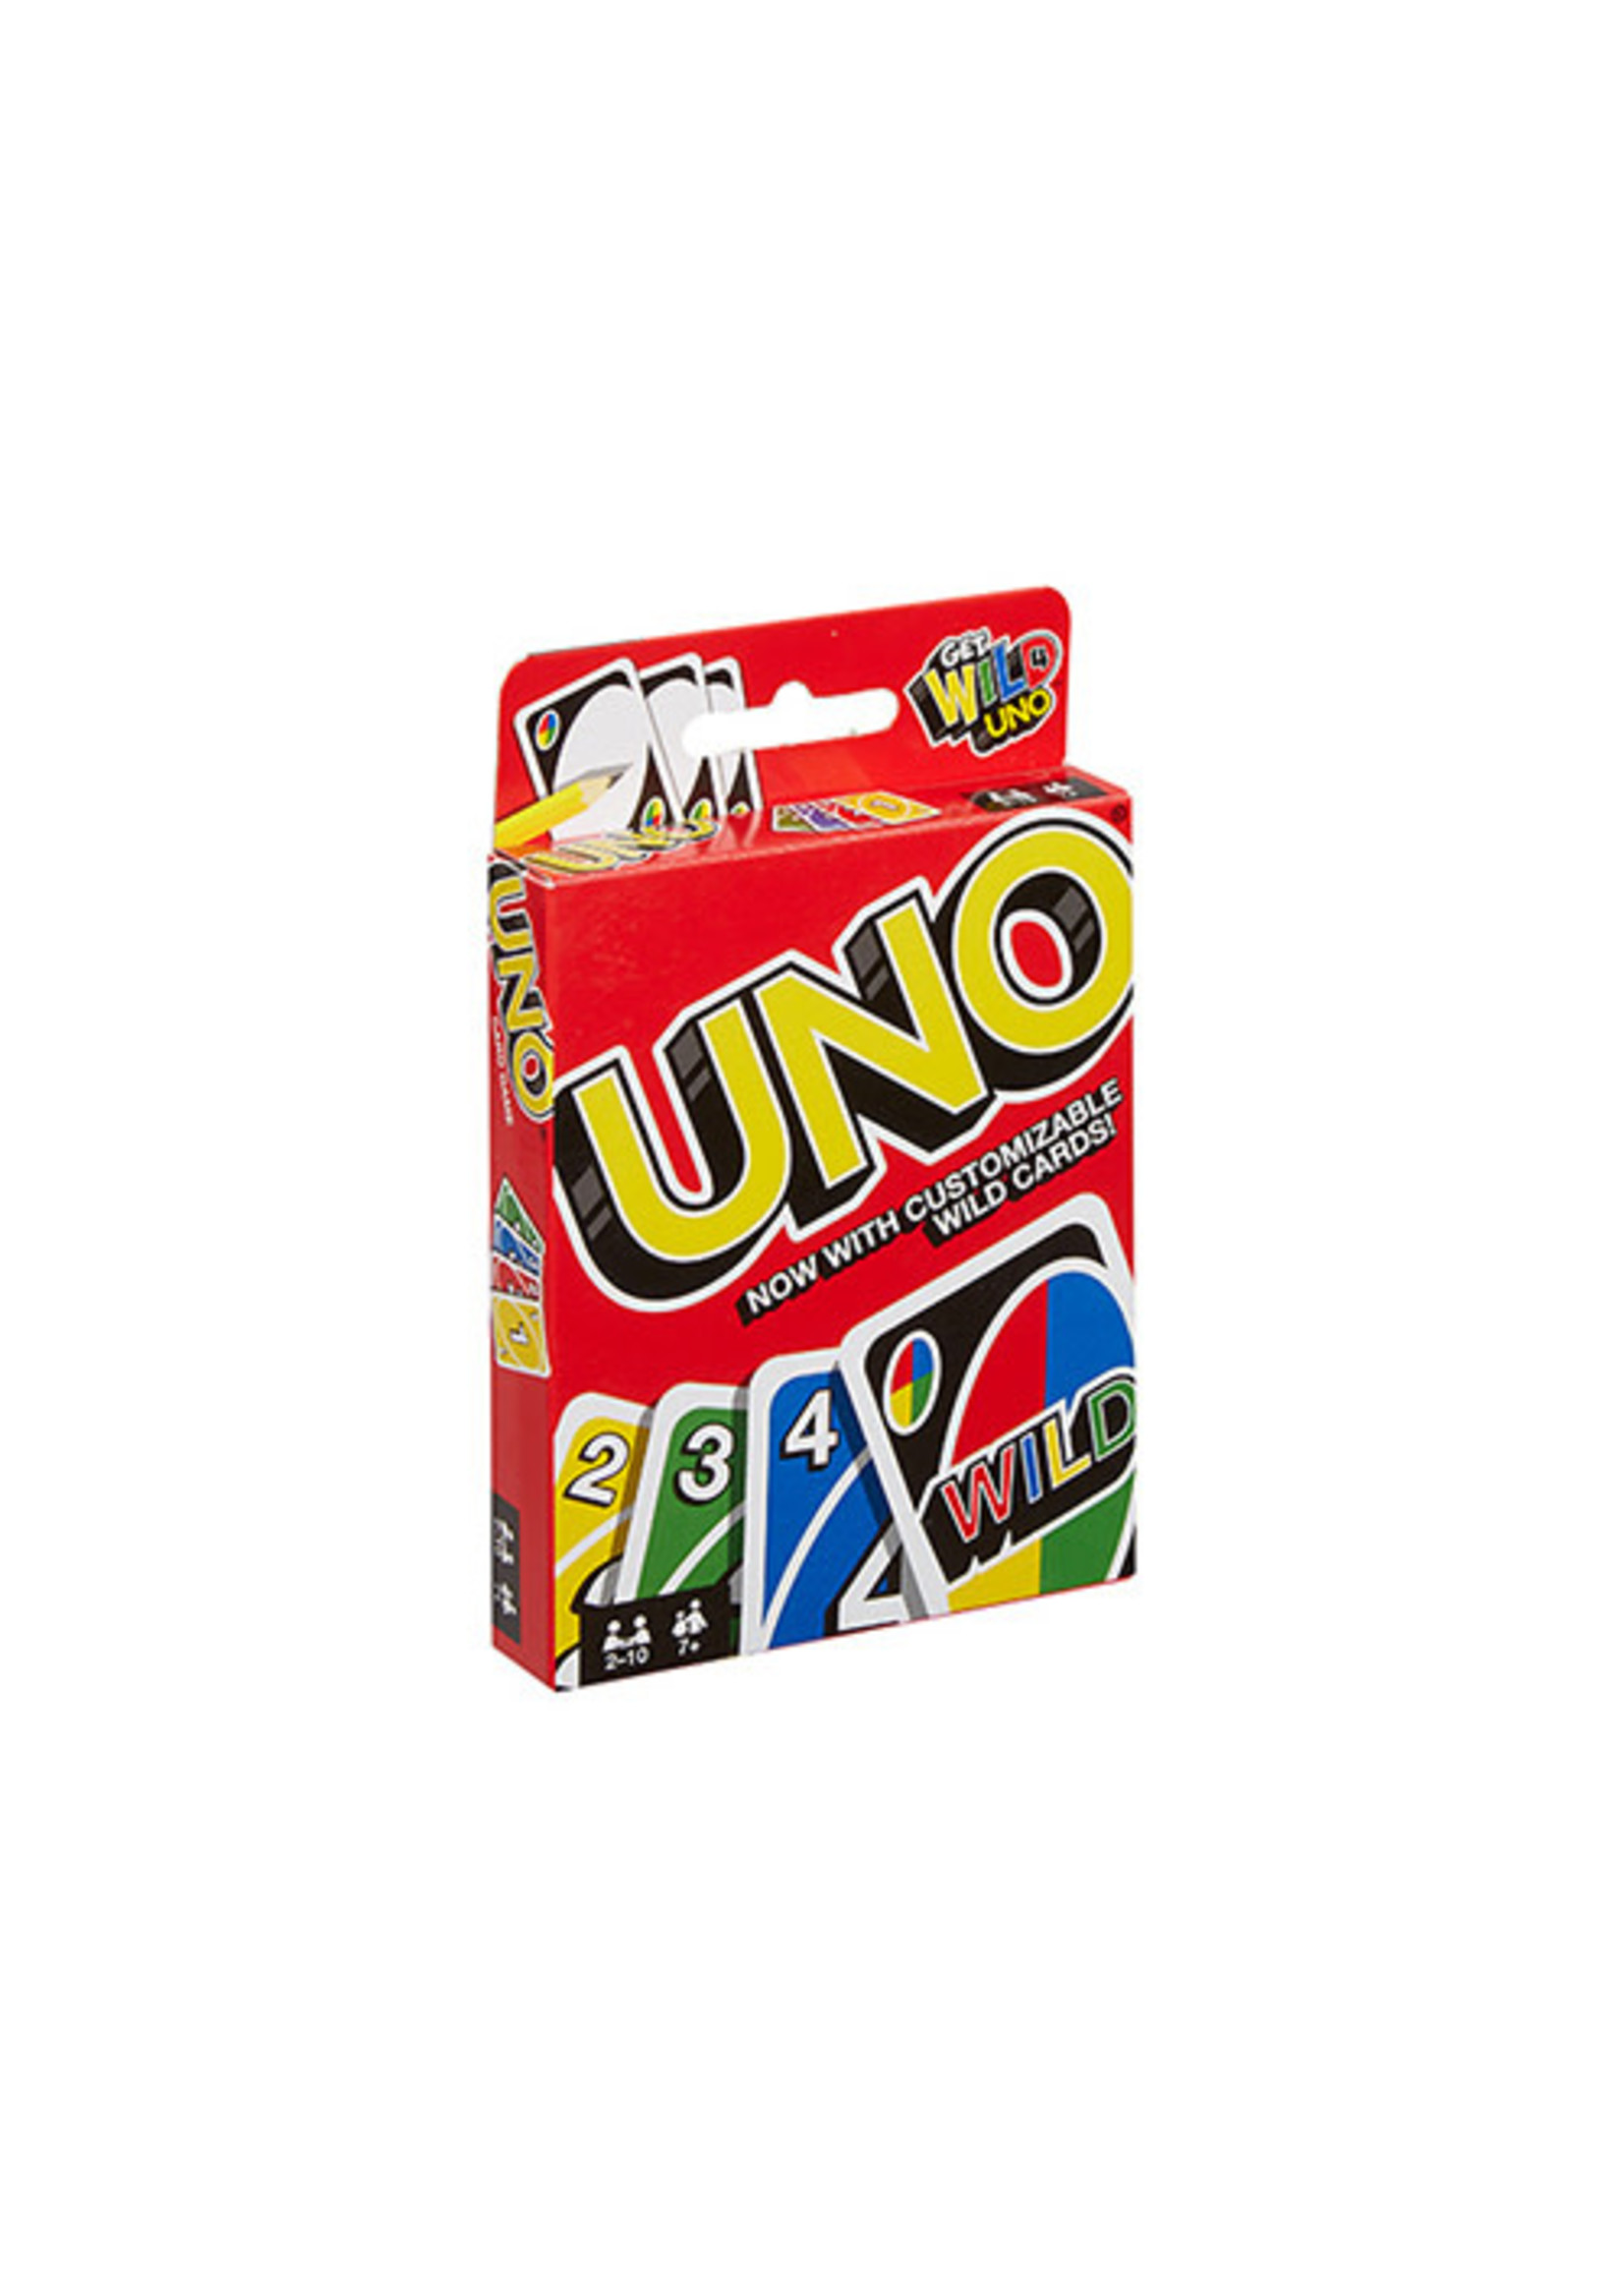 UNO Star Wars Card Game for Kids & Family, 2-10 Players, Ages 7